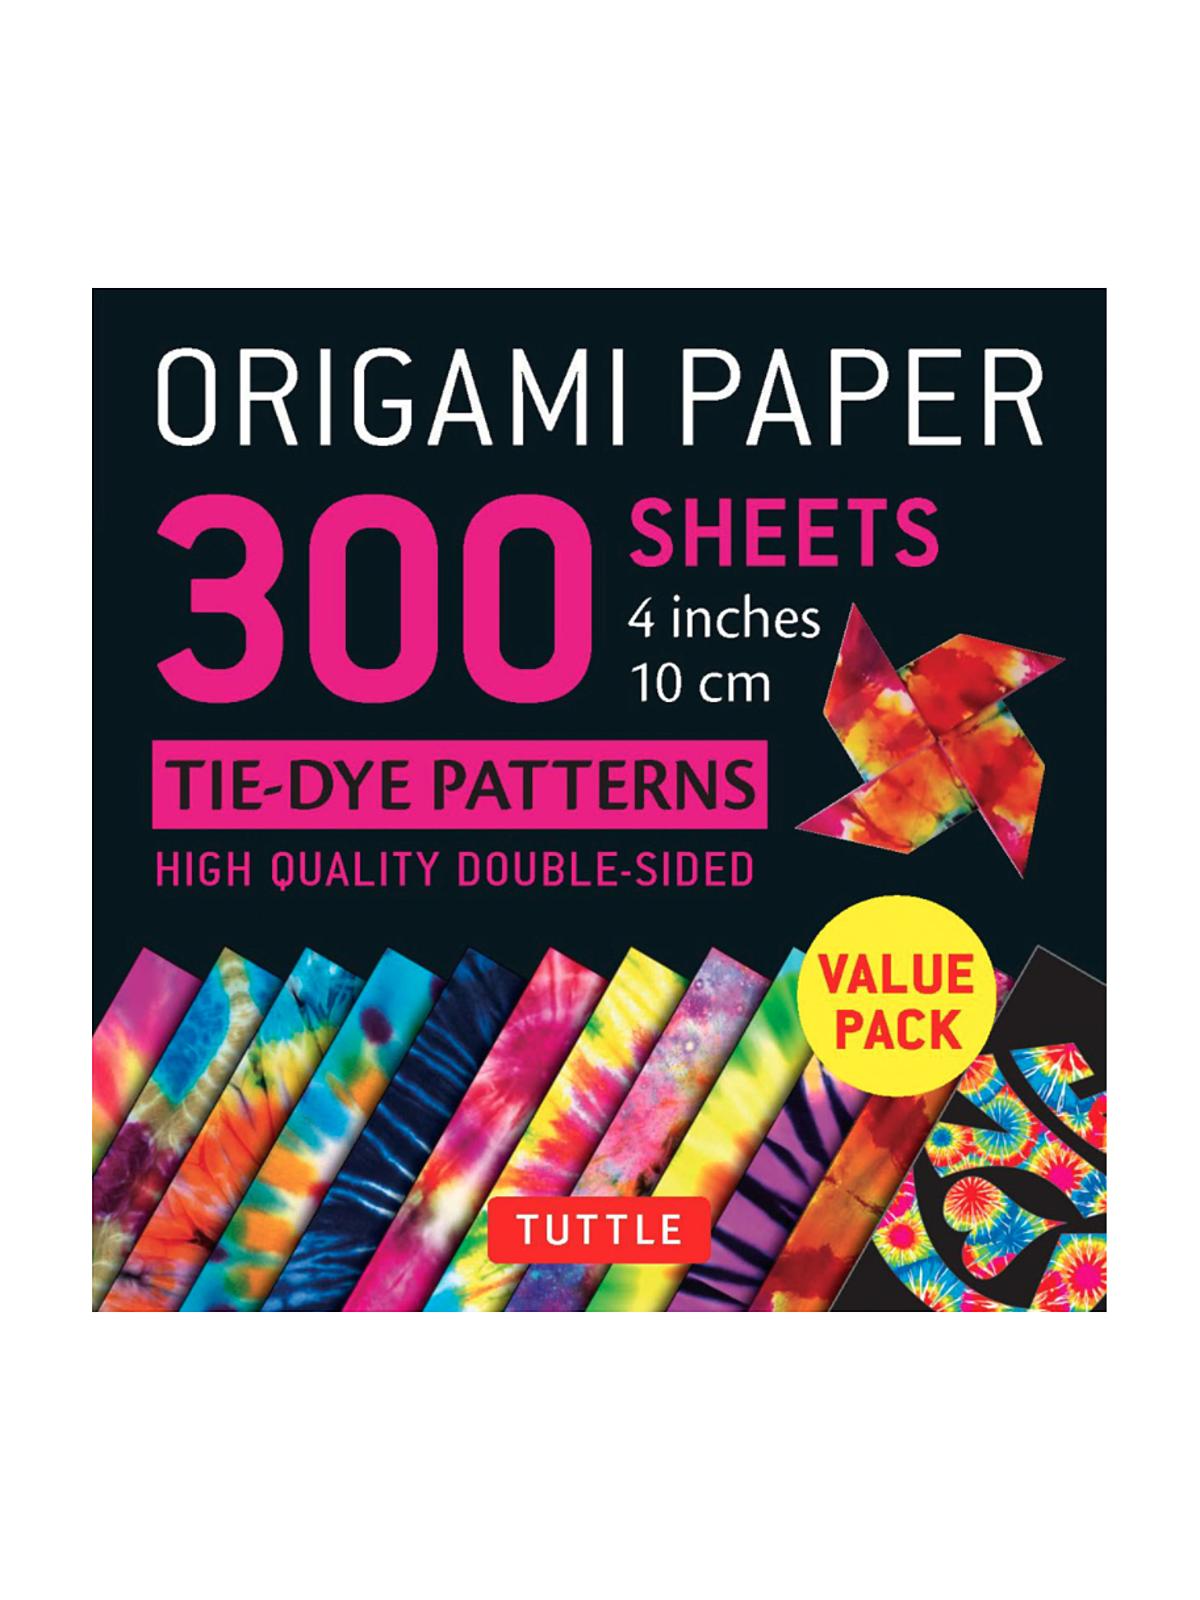 Origami Paper Tie-dye Patterns 6 X 6 300 Sheets